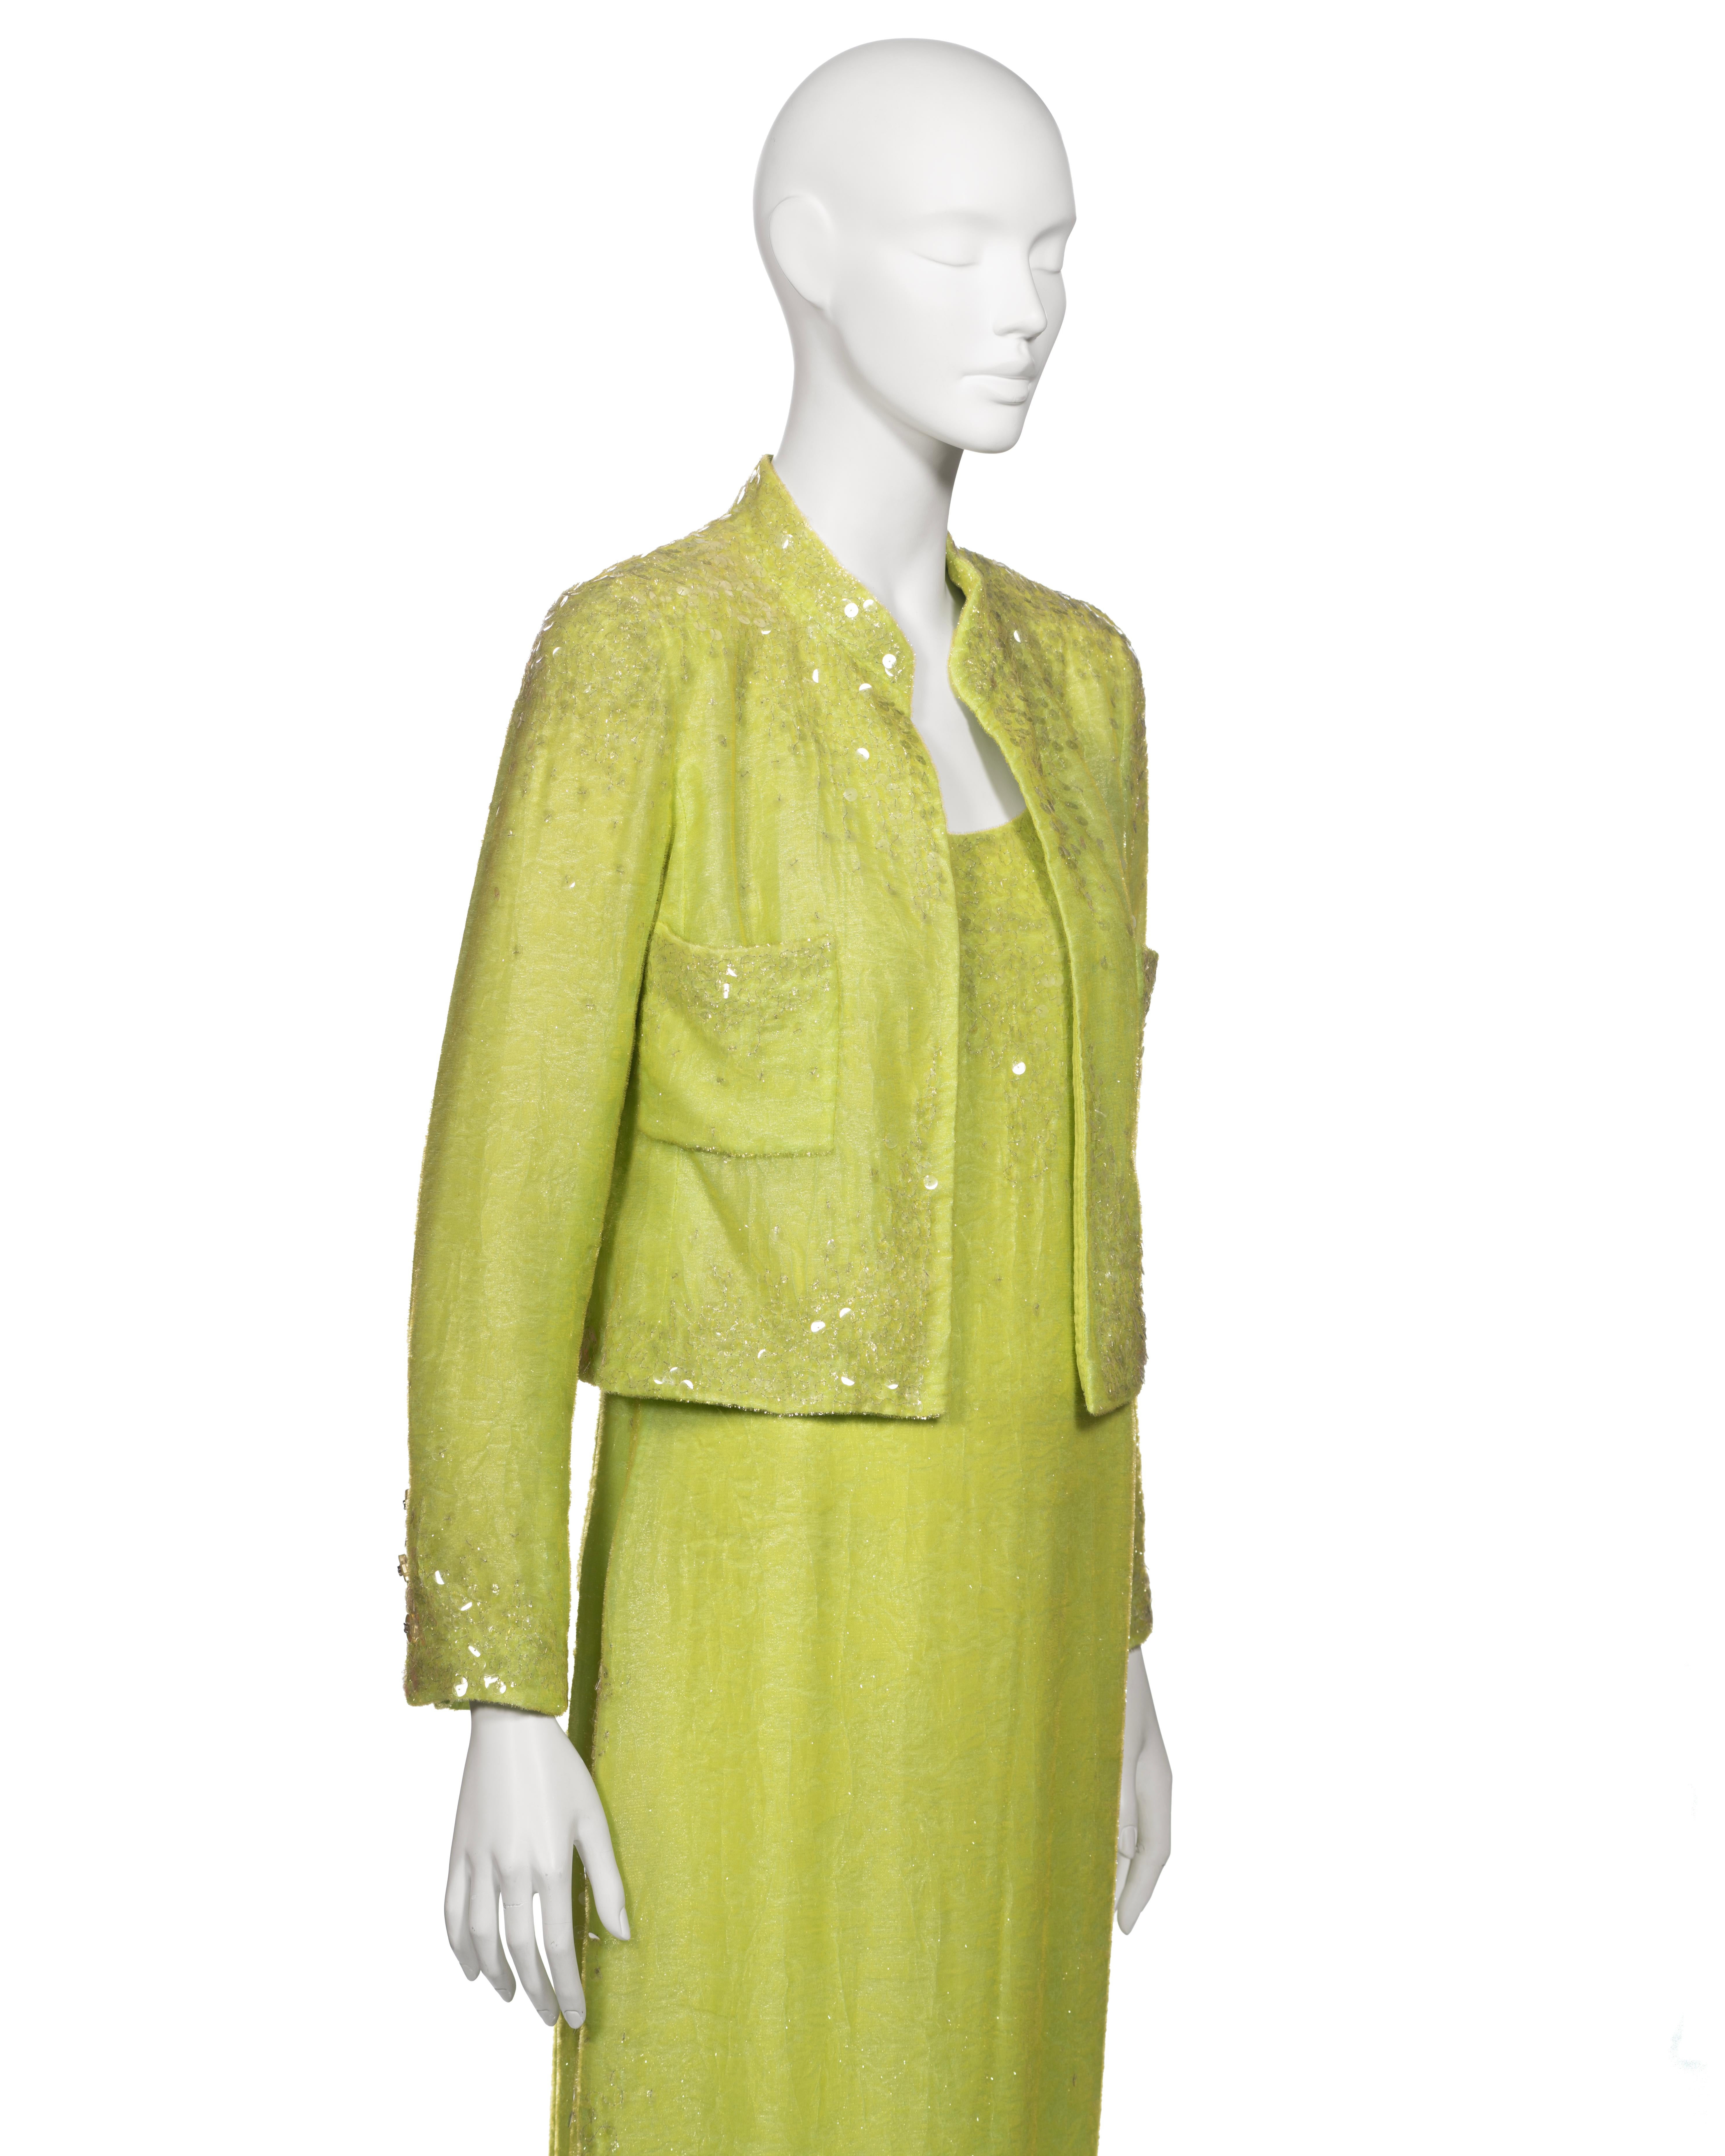 Chanel by Karl Lagerfeld Embellished Lime Green Velvet Dress and Jacket, ss 1997 For Sale 6